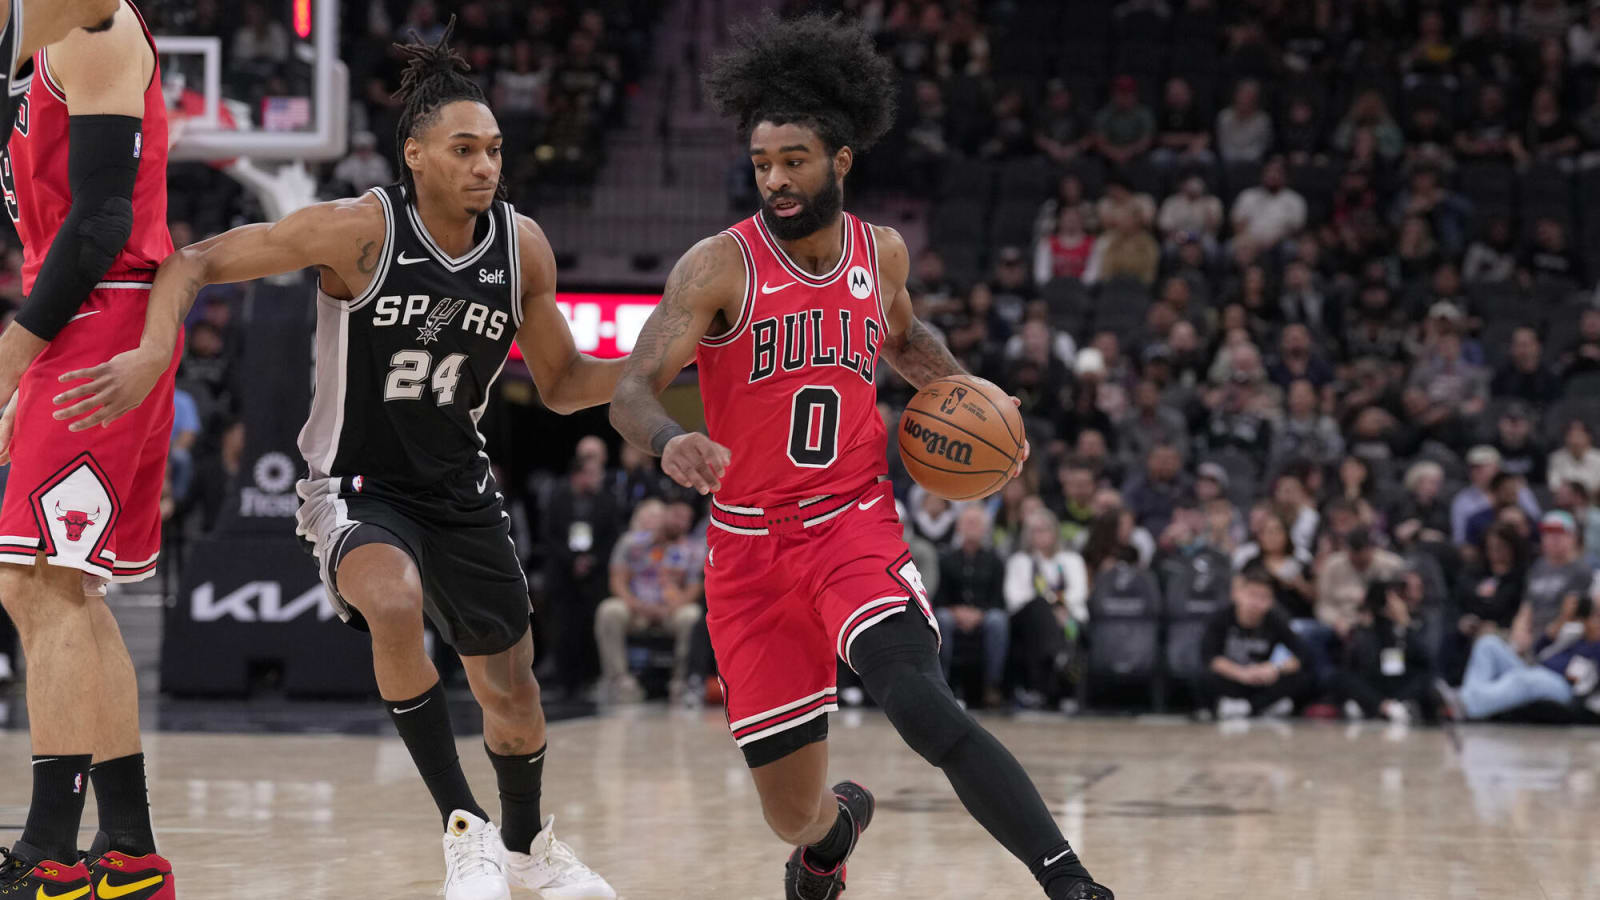 Coby White is playing the best basketball of his career